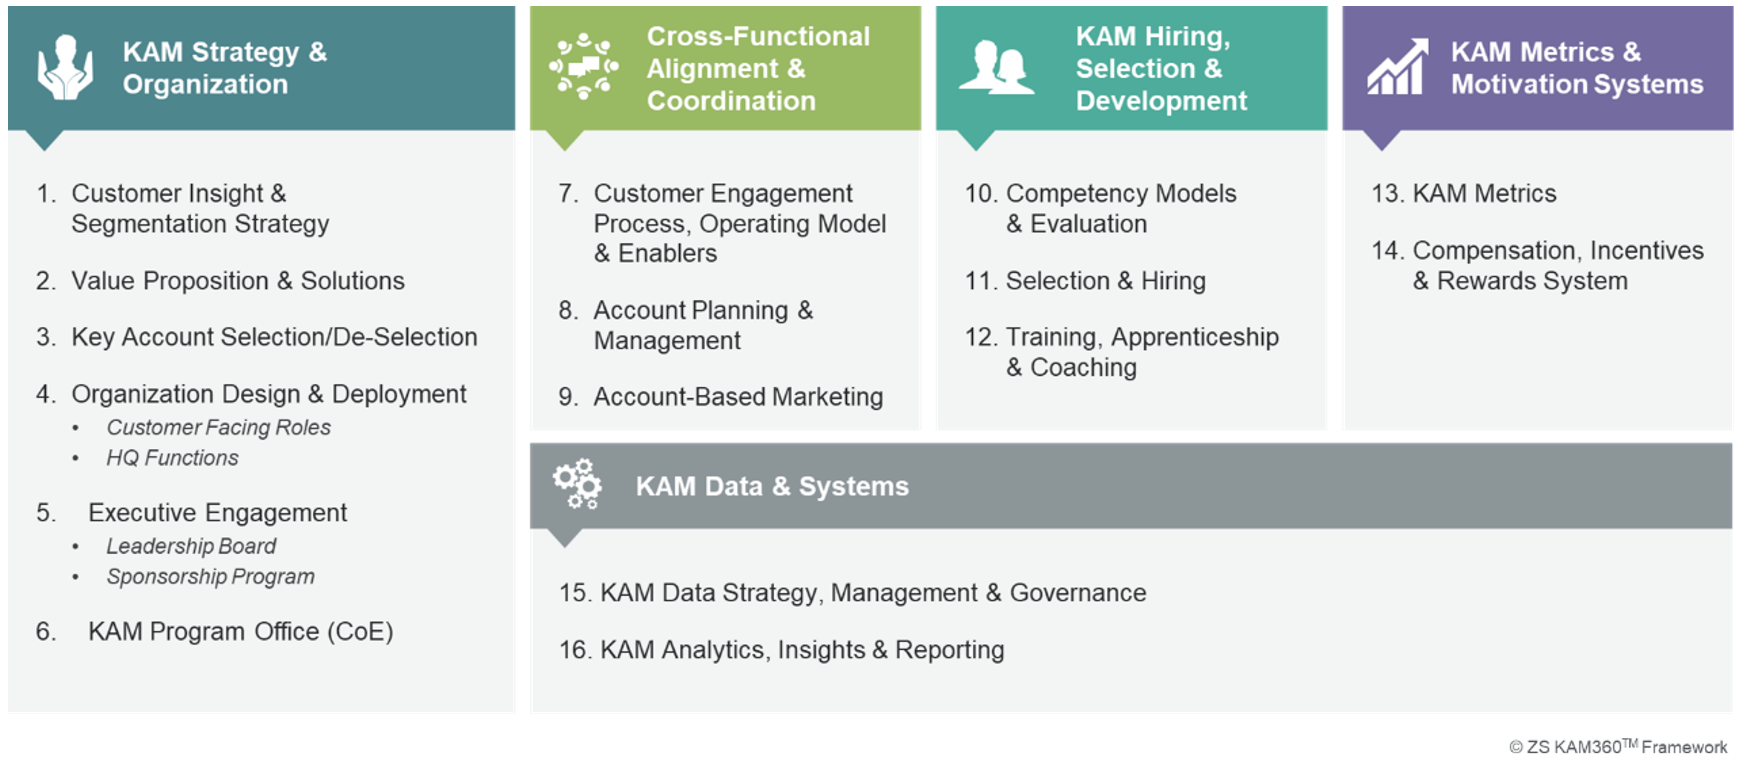 KAM defined as an organization wide business strategy (ZS KAM360™)